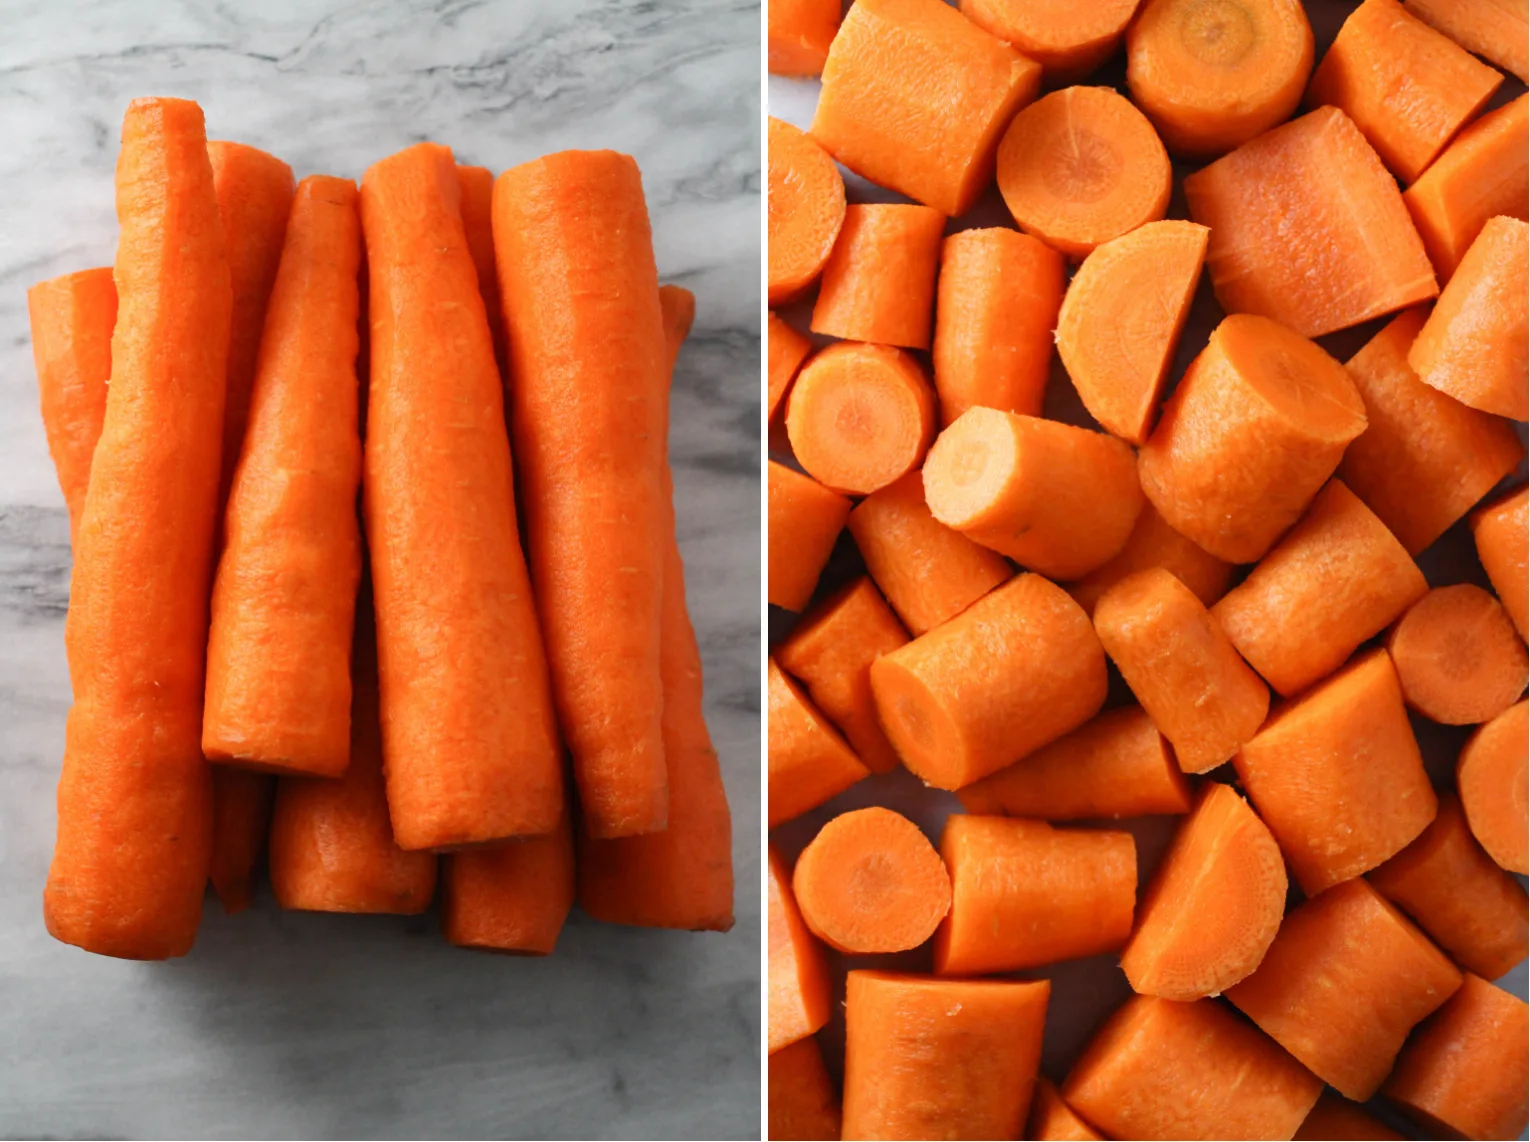 Collage of two images side-by-side. On the left, there is an image of peeled carrots on marble background. On the right, an image of carrot slices.